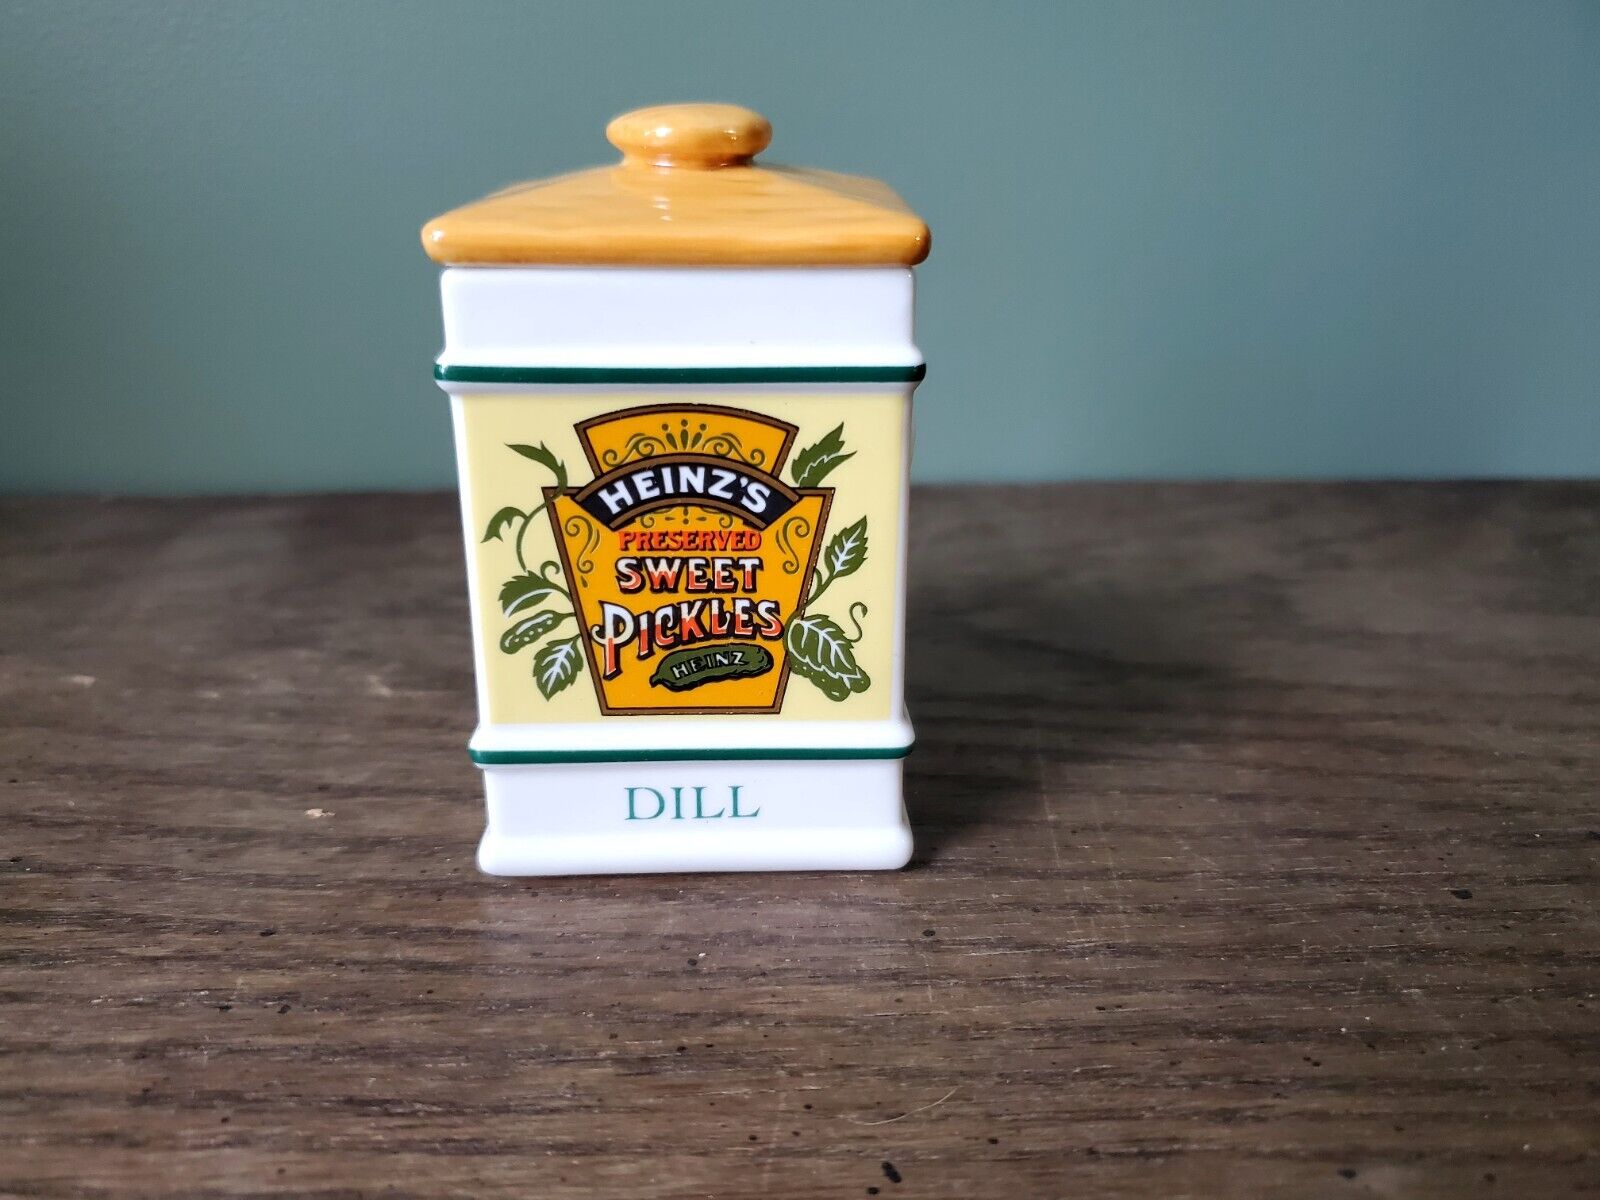 VTG 1991 The Country Store Spice Jar Collection Heinz Sweet Pickles - Dill